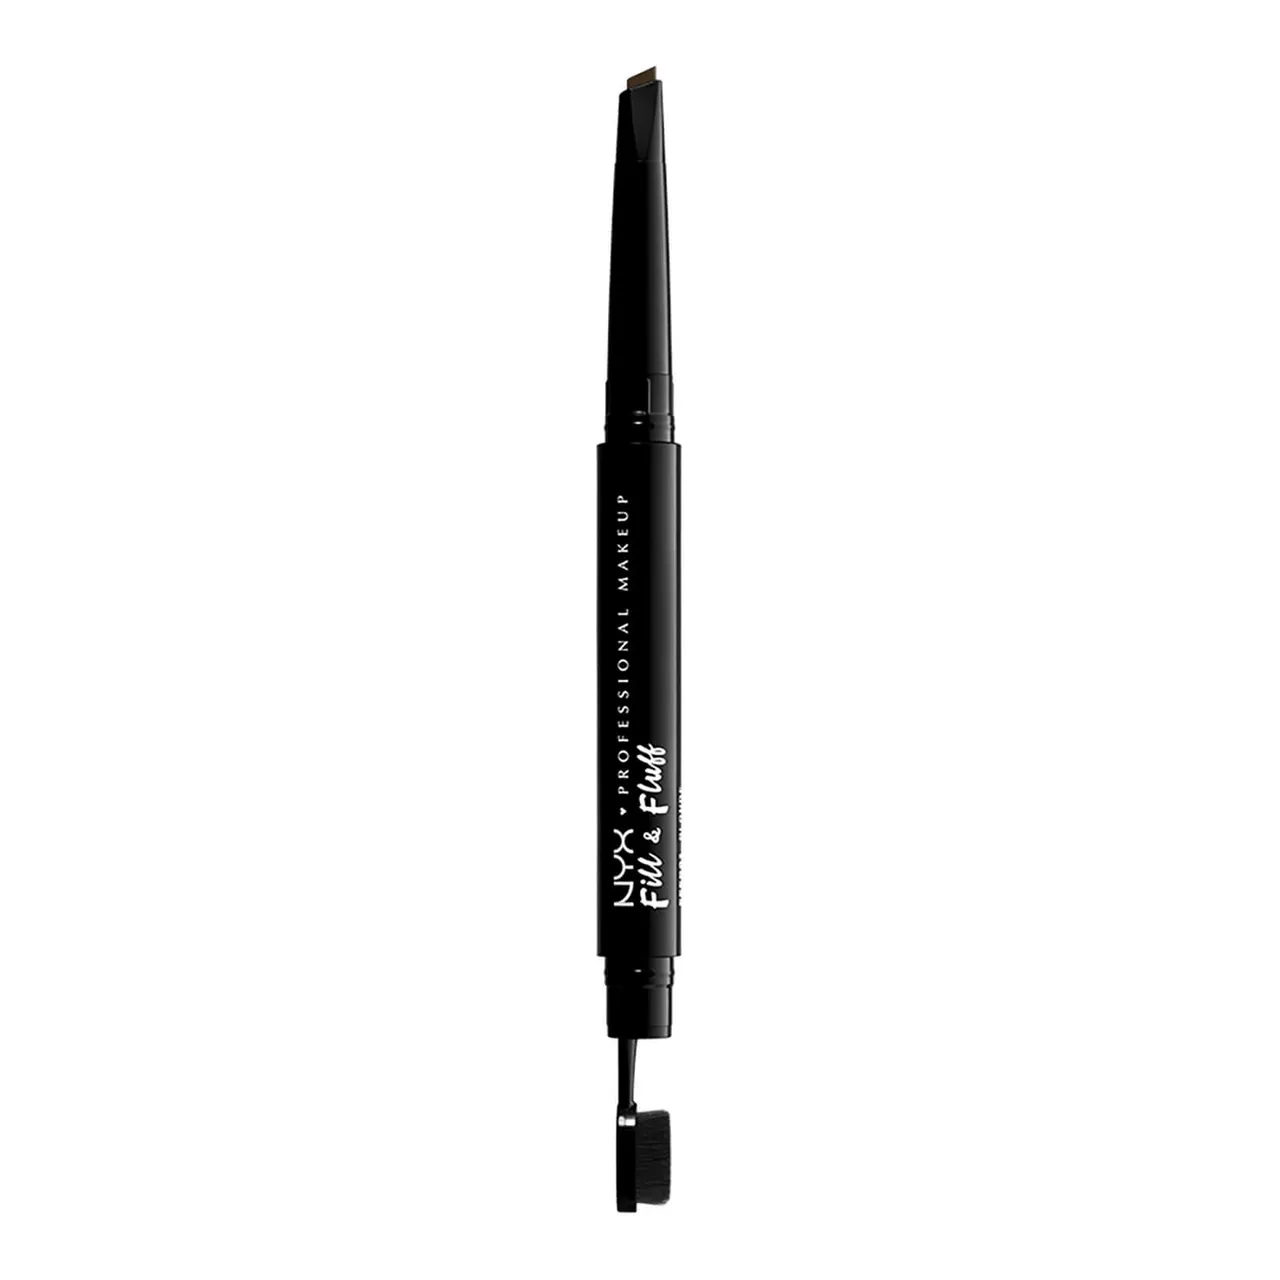 NYX Professional Makeup Fill and Fluff Eyebrow Pomade Pencil 0.2g (Various Shades) - Espresso